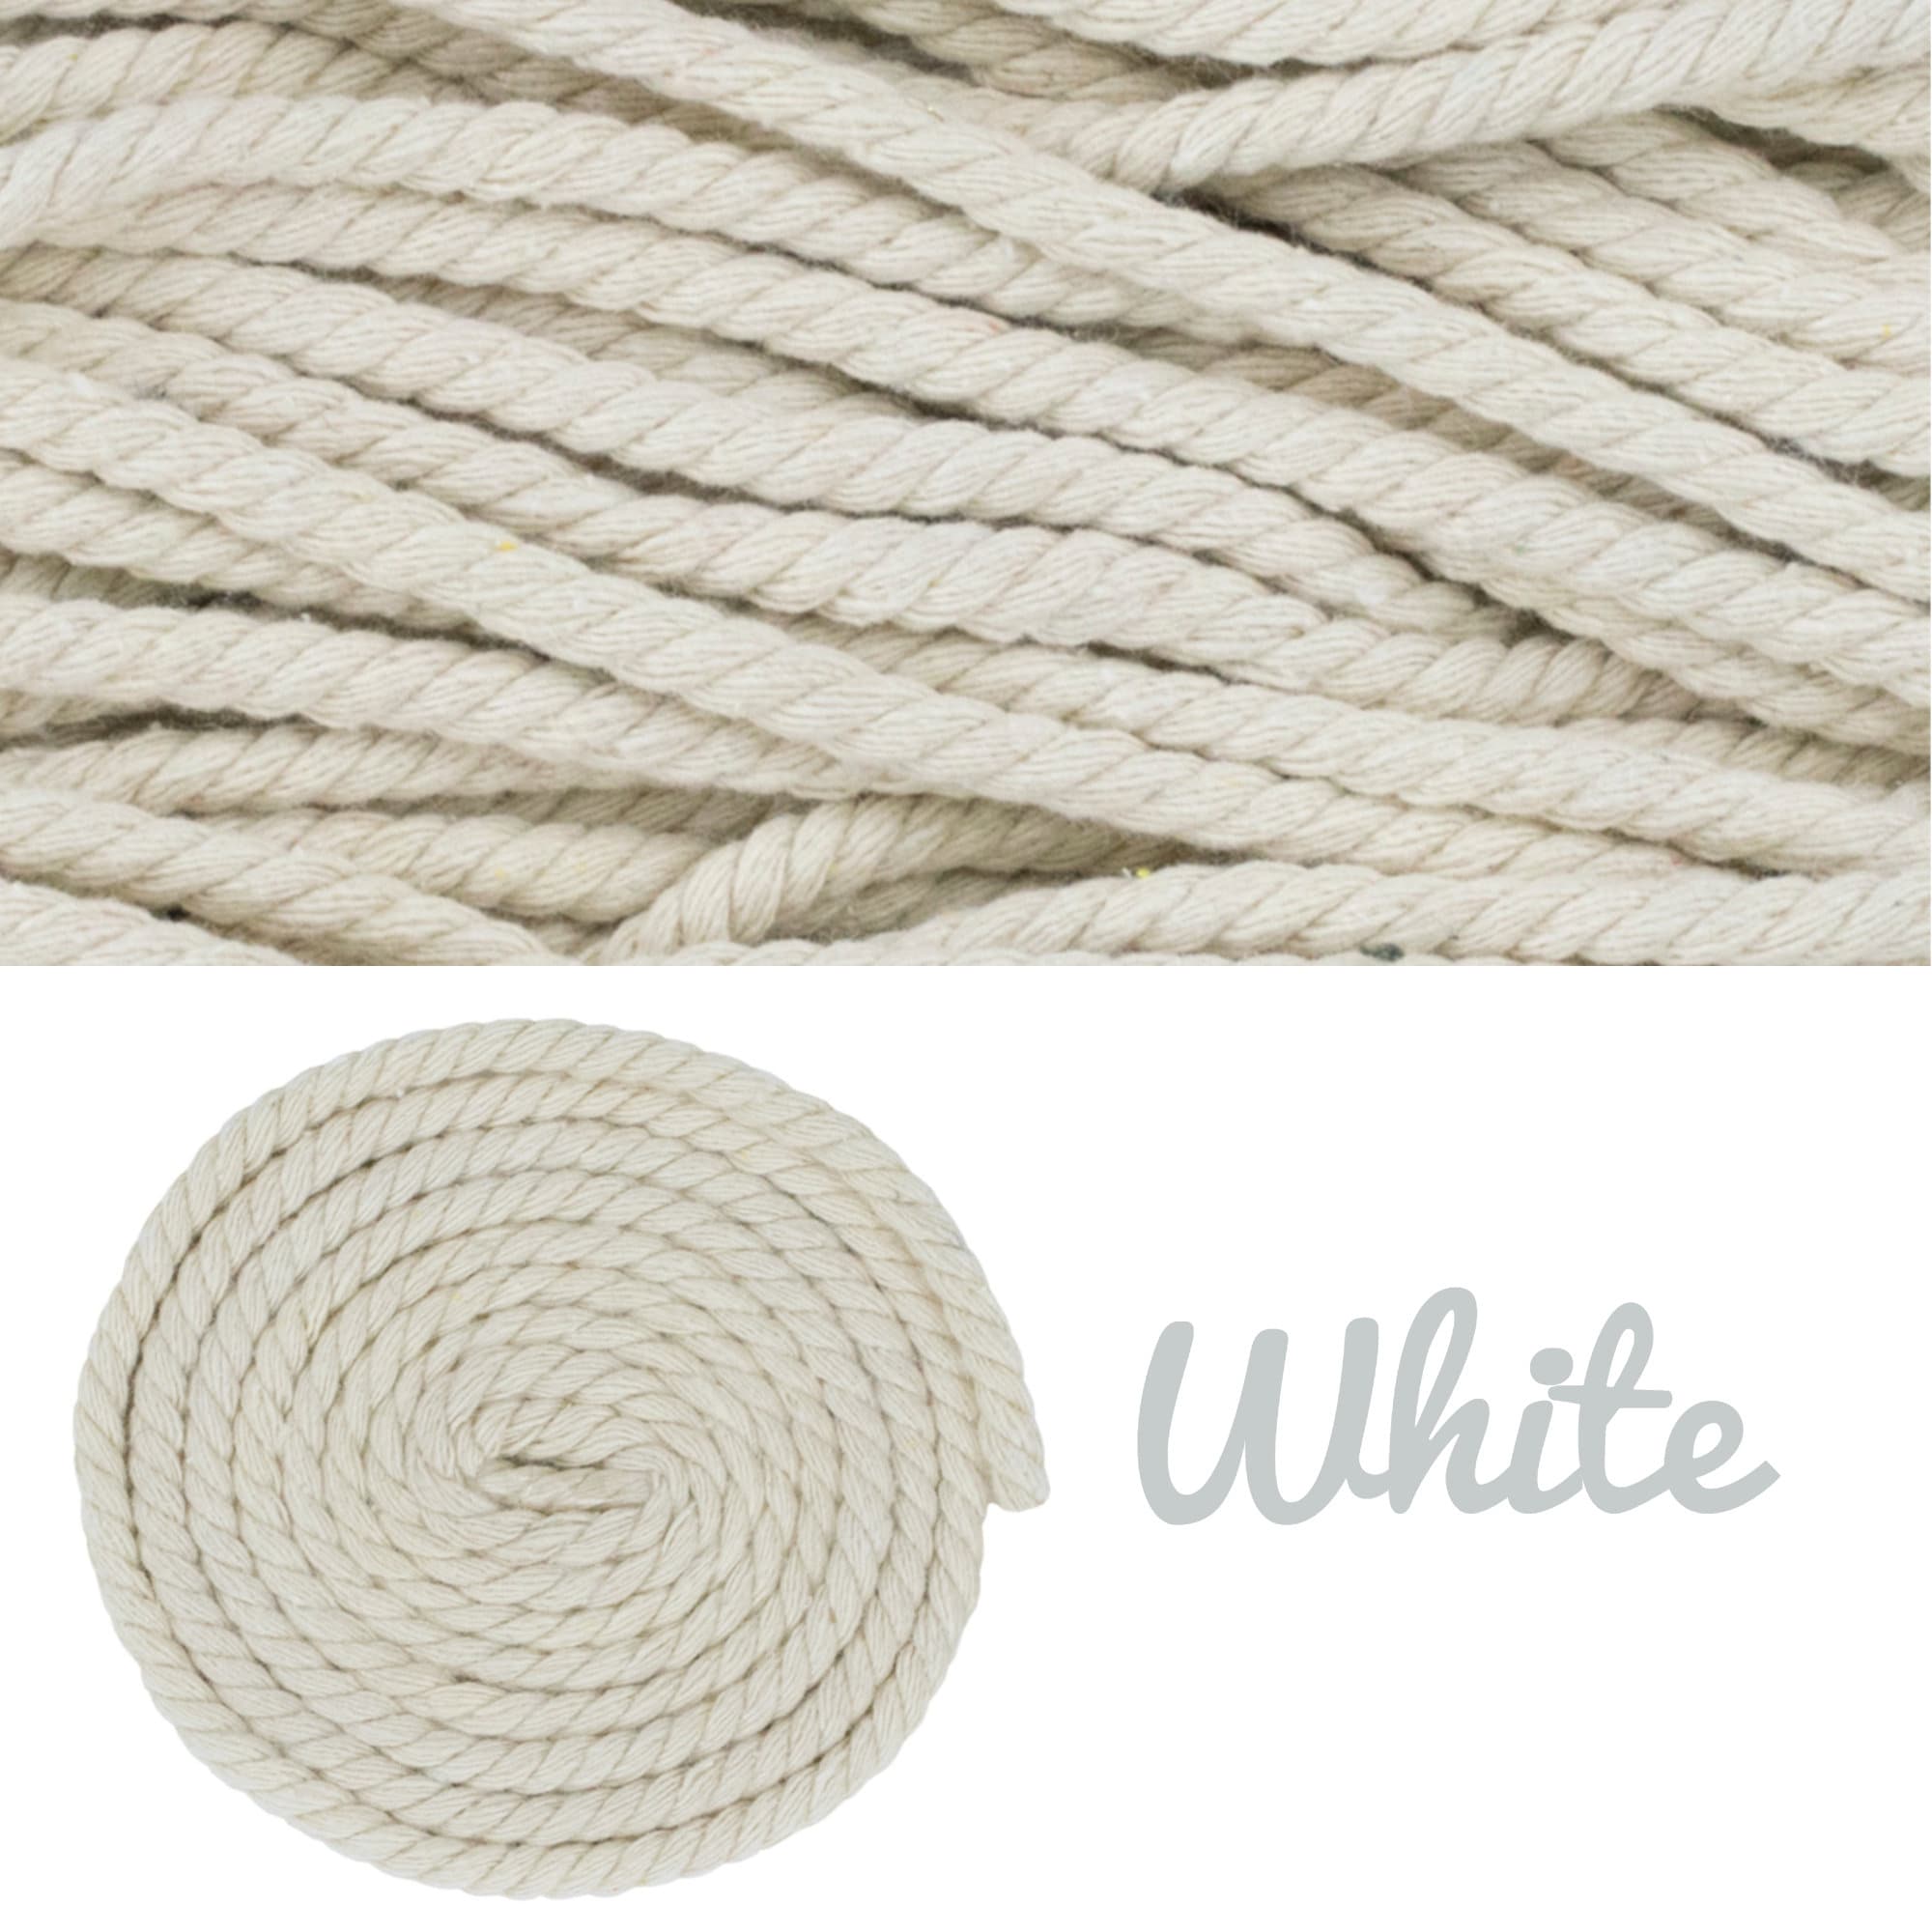 1/4 Inch Macramé Cord 6MM Cotton Rope Super Soft Weaving Cord Three Strand  Twisted Cotton Rope Black Tan Gray Earth Tone Rope 